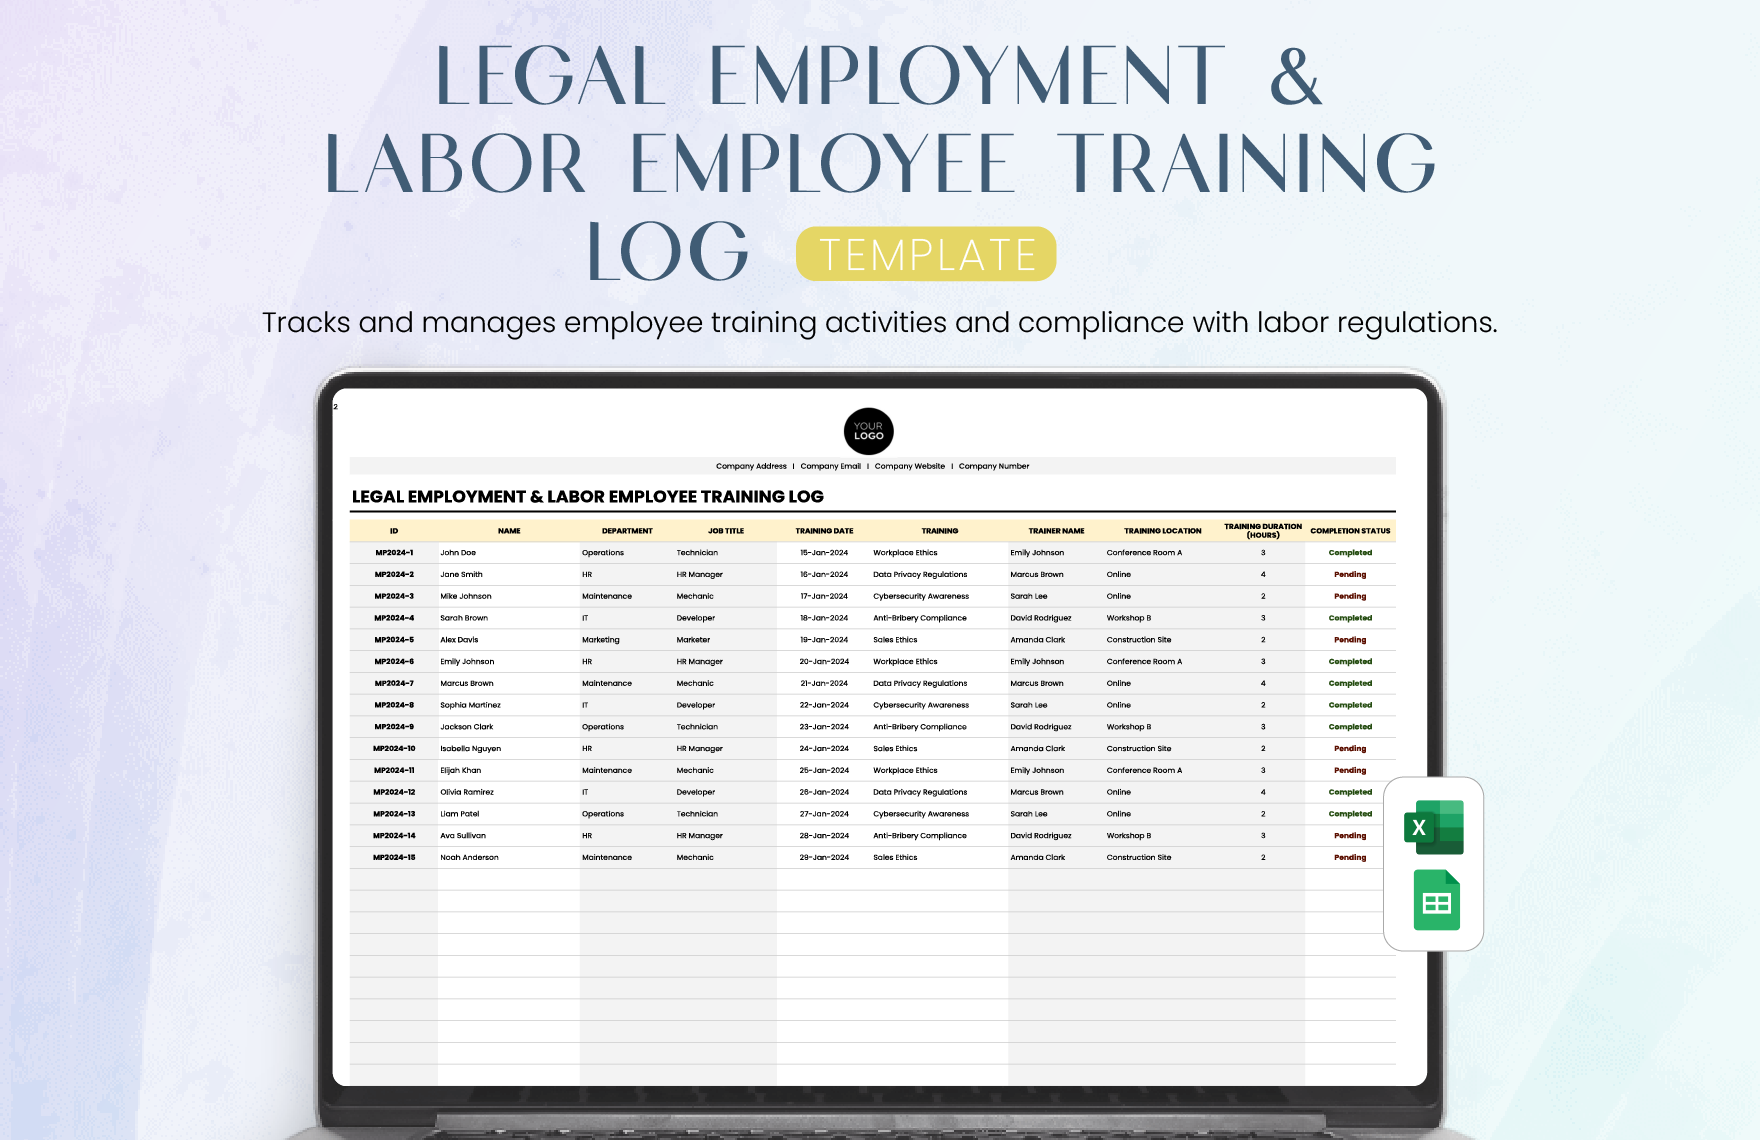 Legal Employment & Labor Employee Training Log Template in Excel, Google Sheets